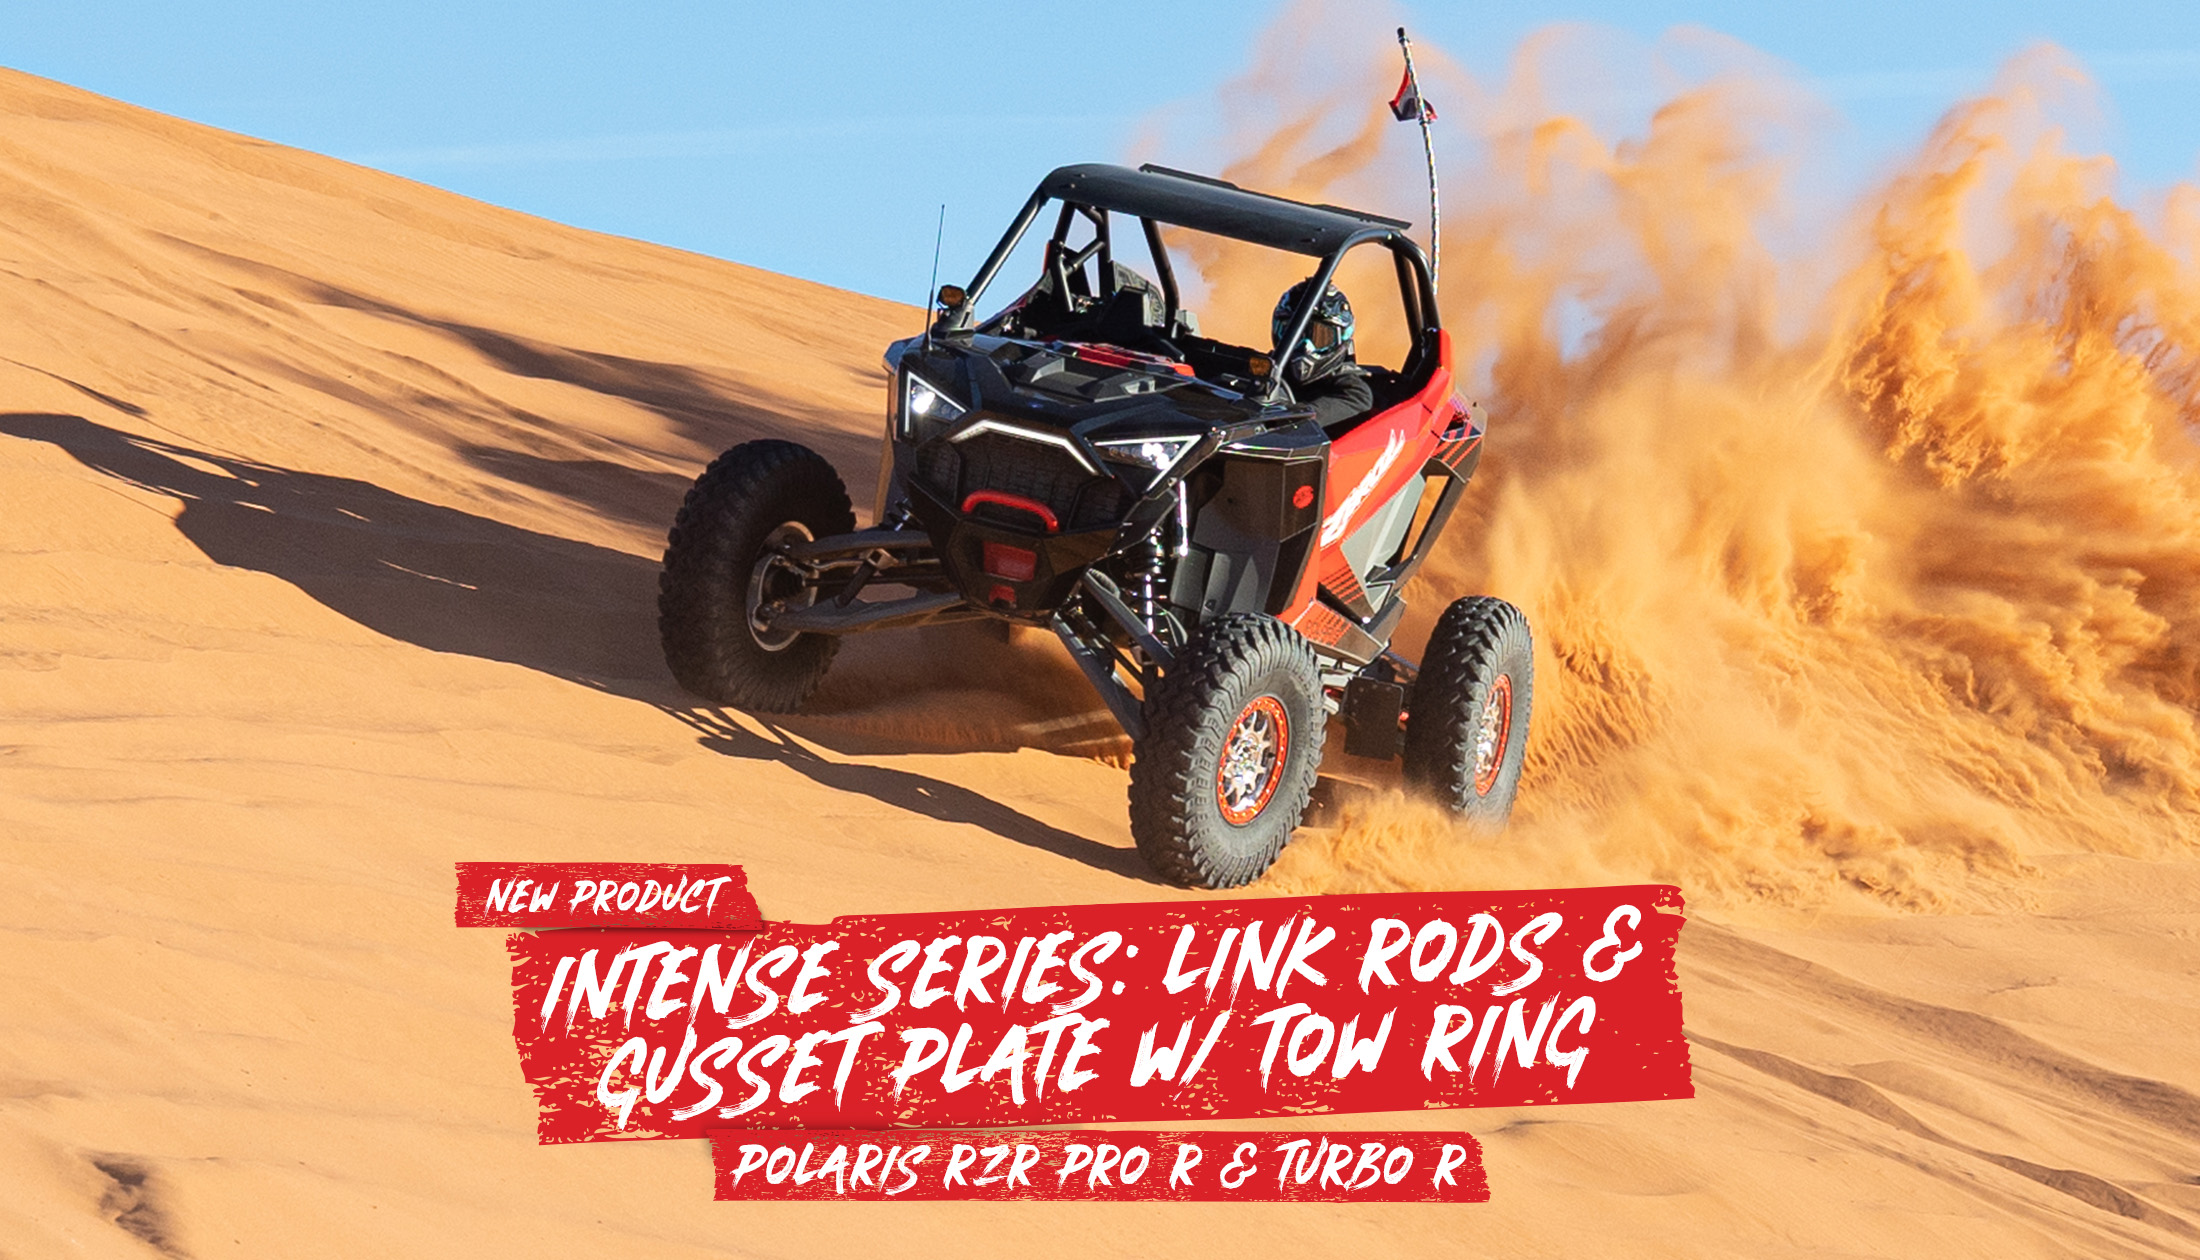 Polaris Pro R and Turbo R Products